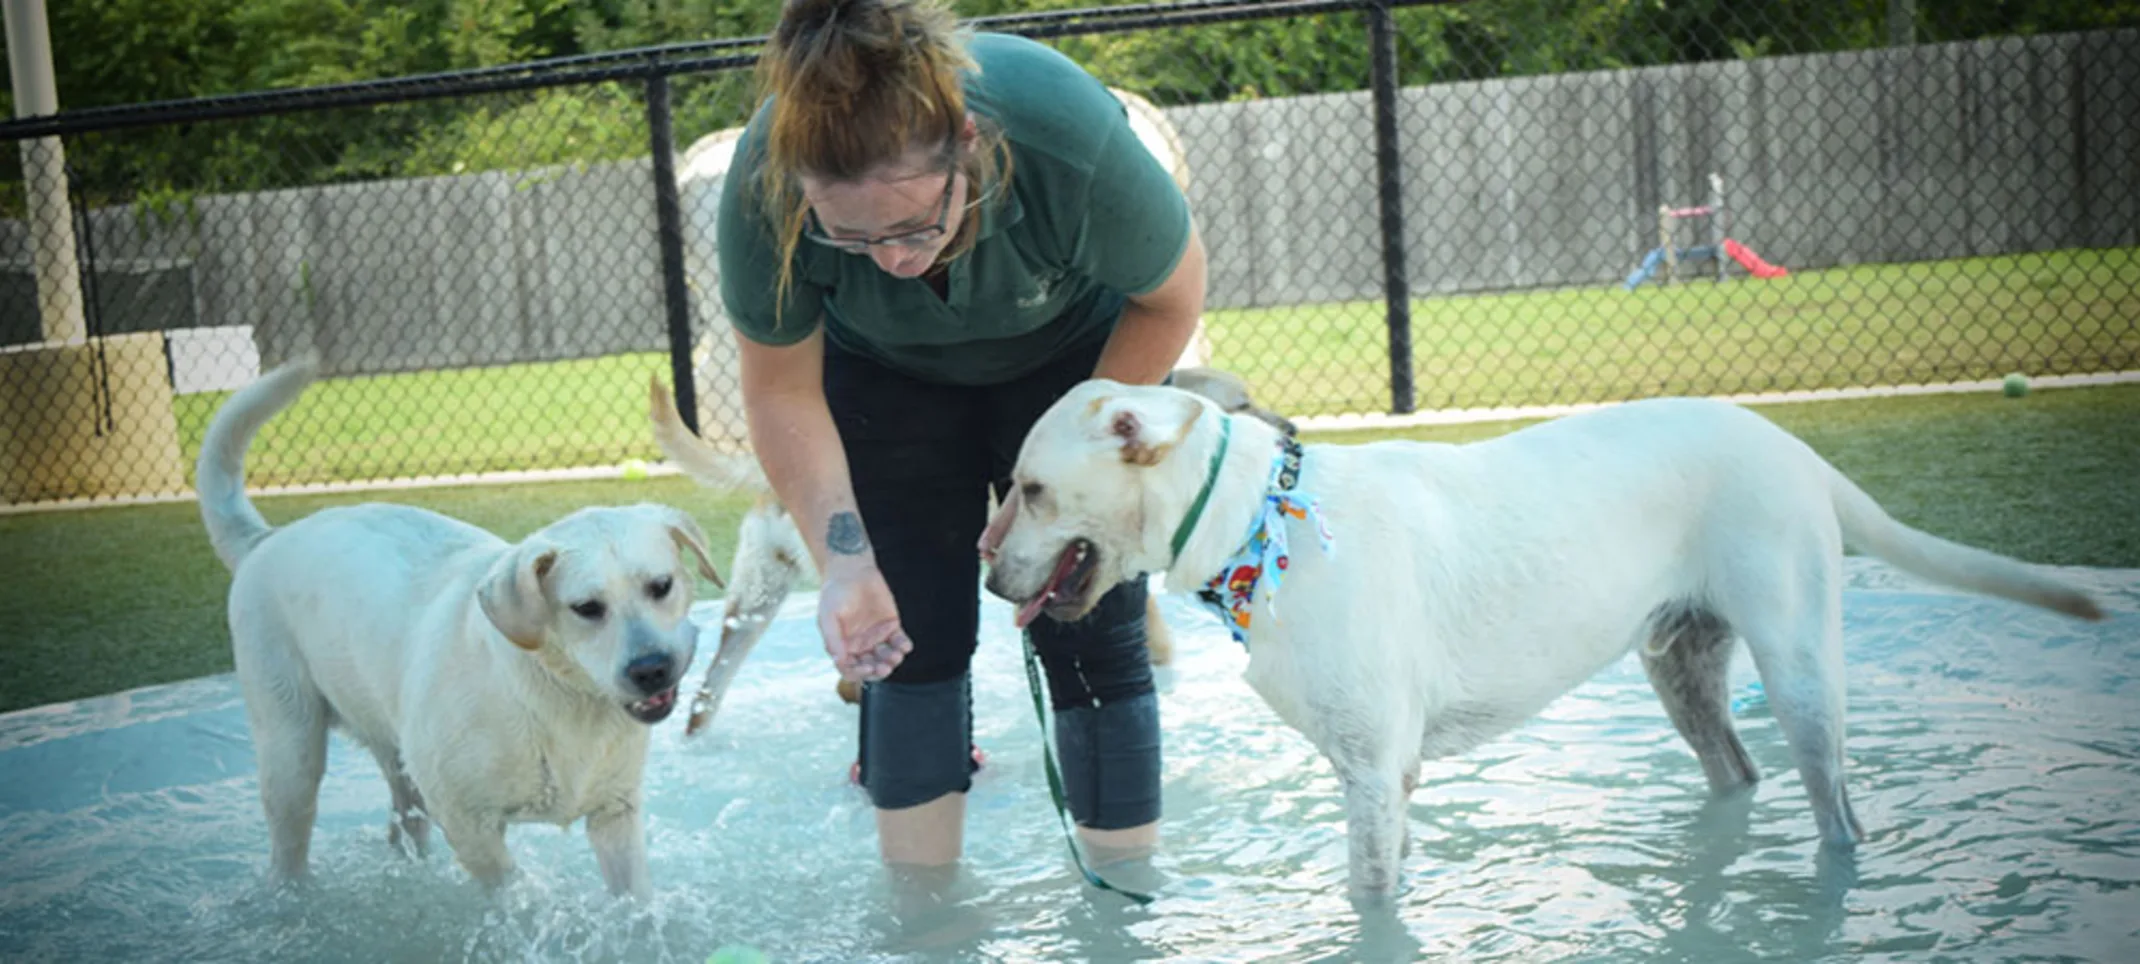 Dogs and staff playing in pool